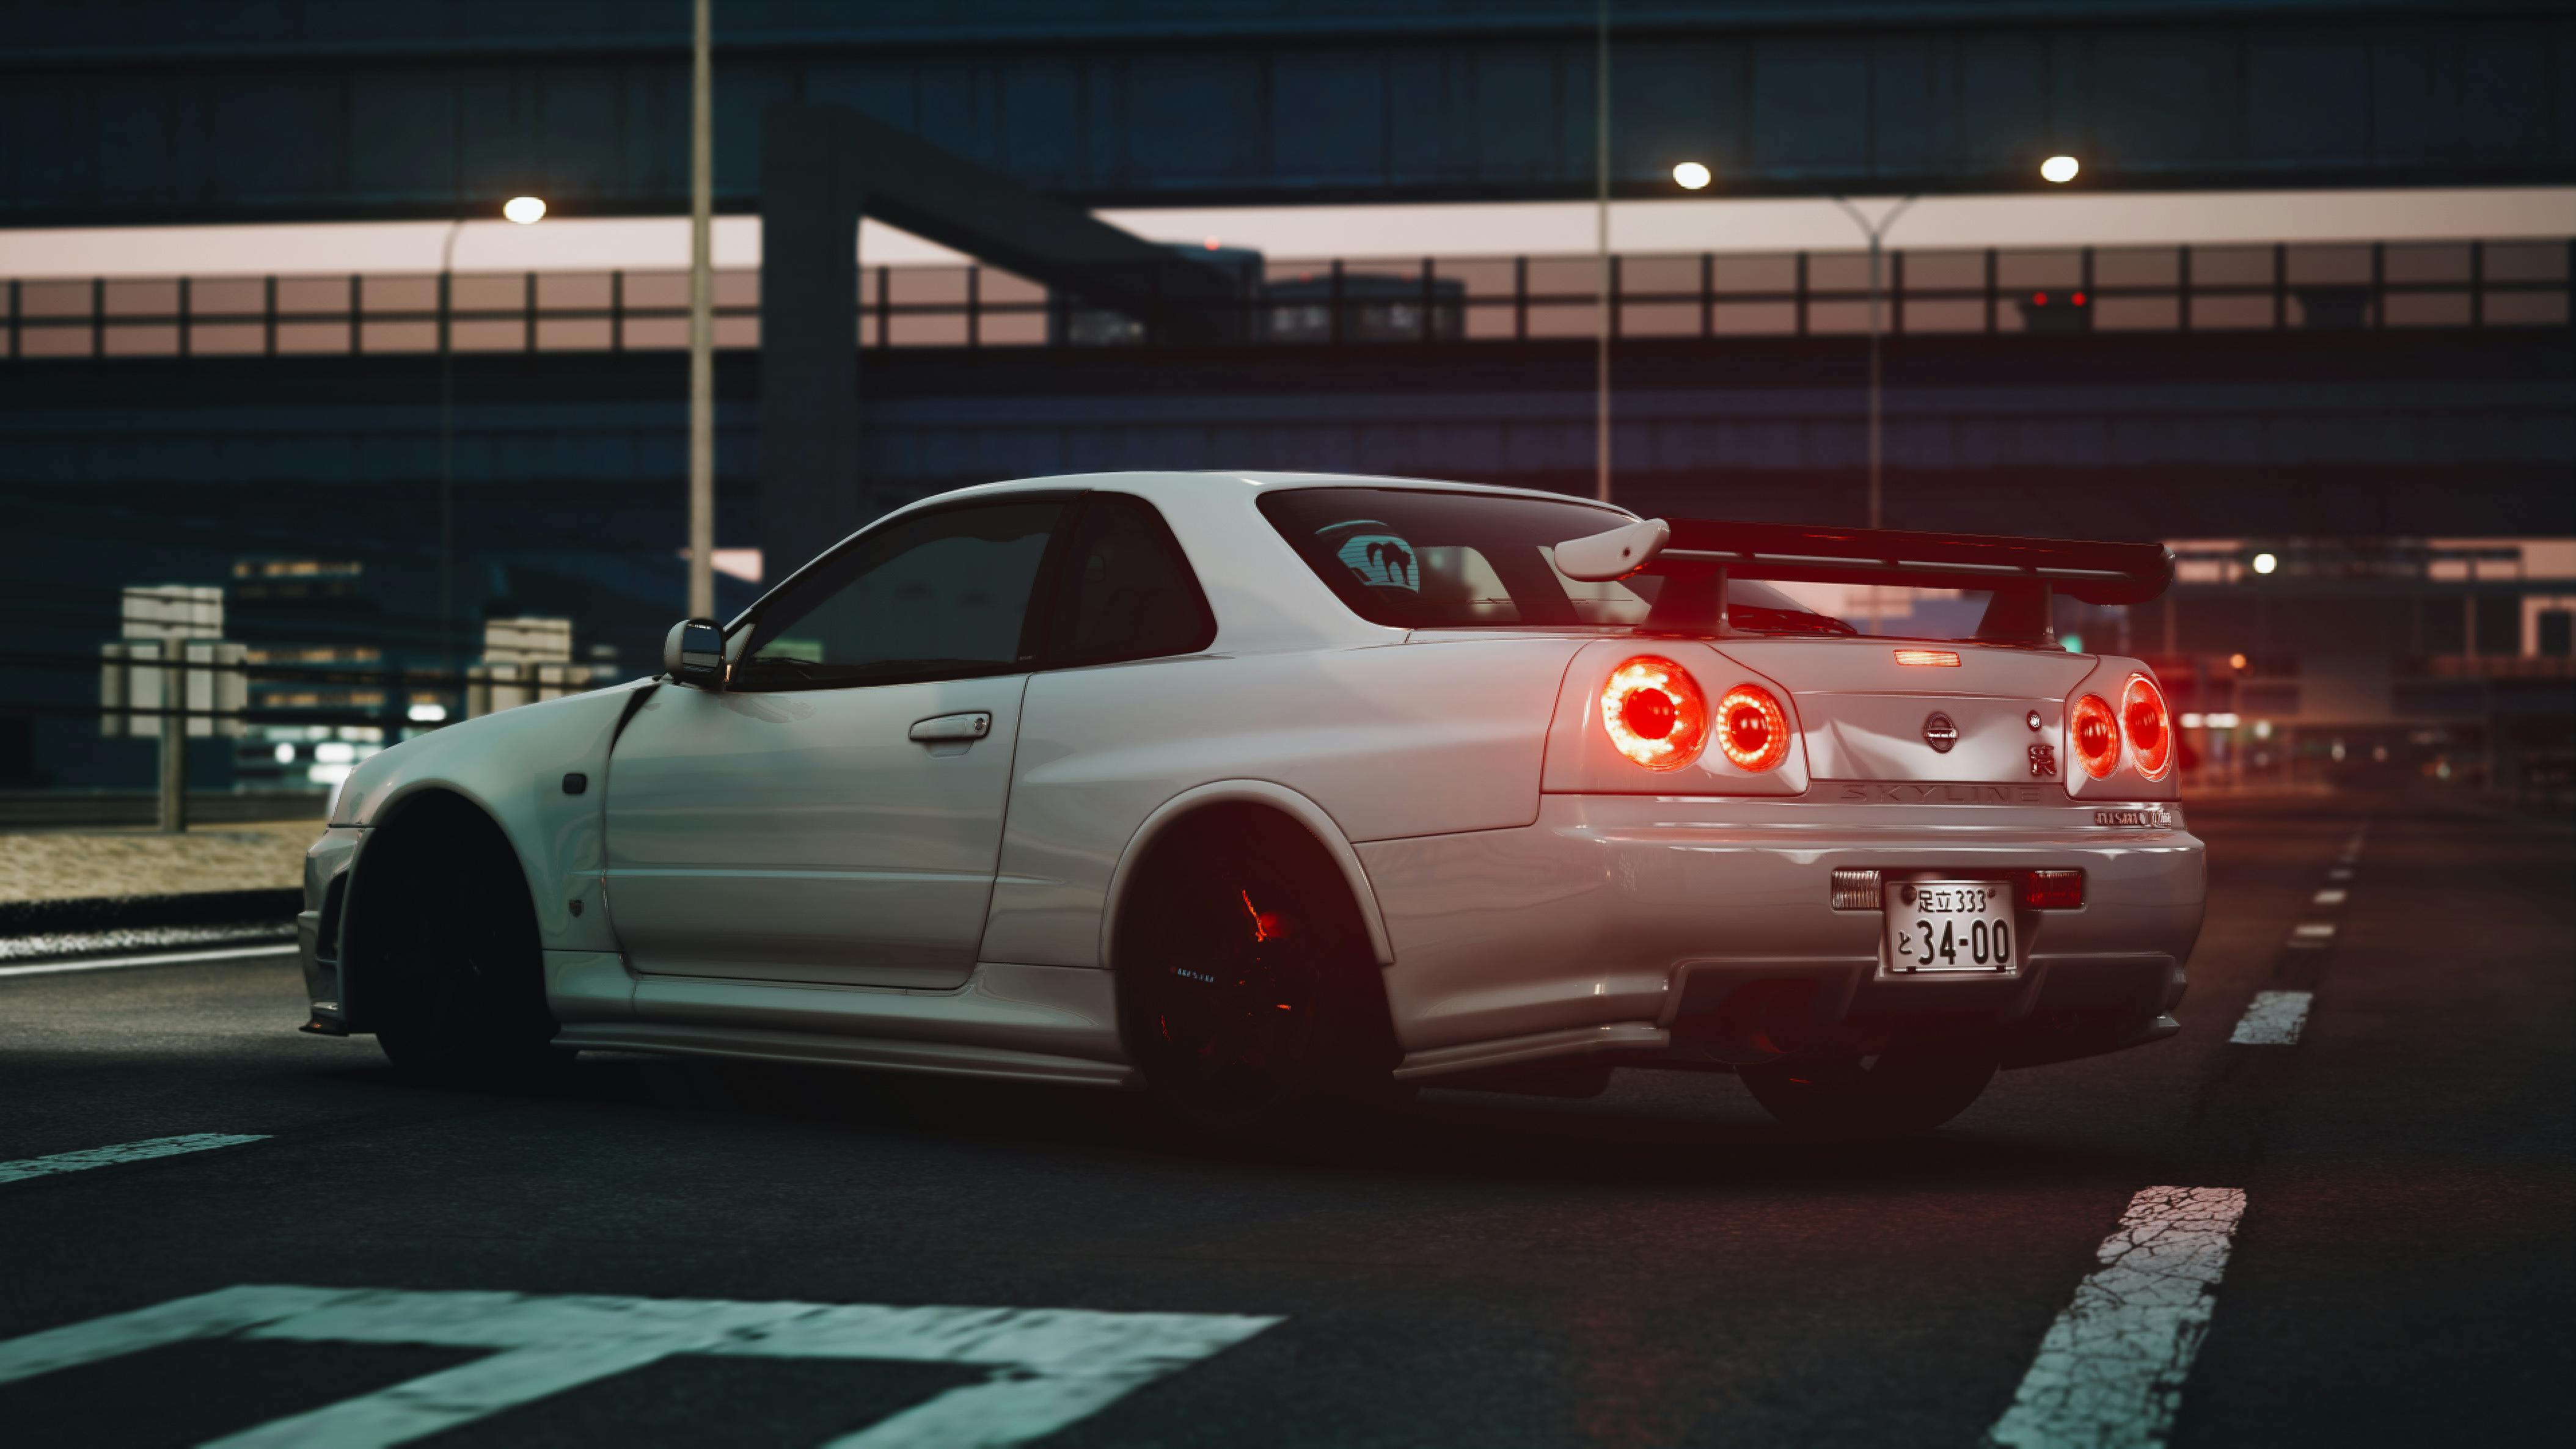 1440x2960 Nissan Skyline Gtr R34 4k Samsung Galaxy Note 98 S9S8S8 QHD  HD 4k Wallpapers Images Backgrounds Photos and Pictures